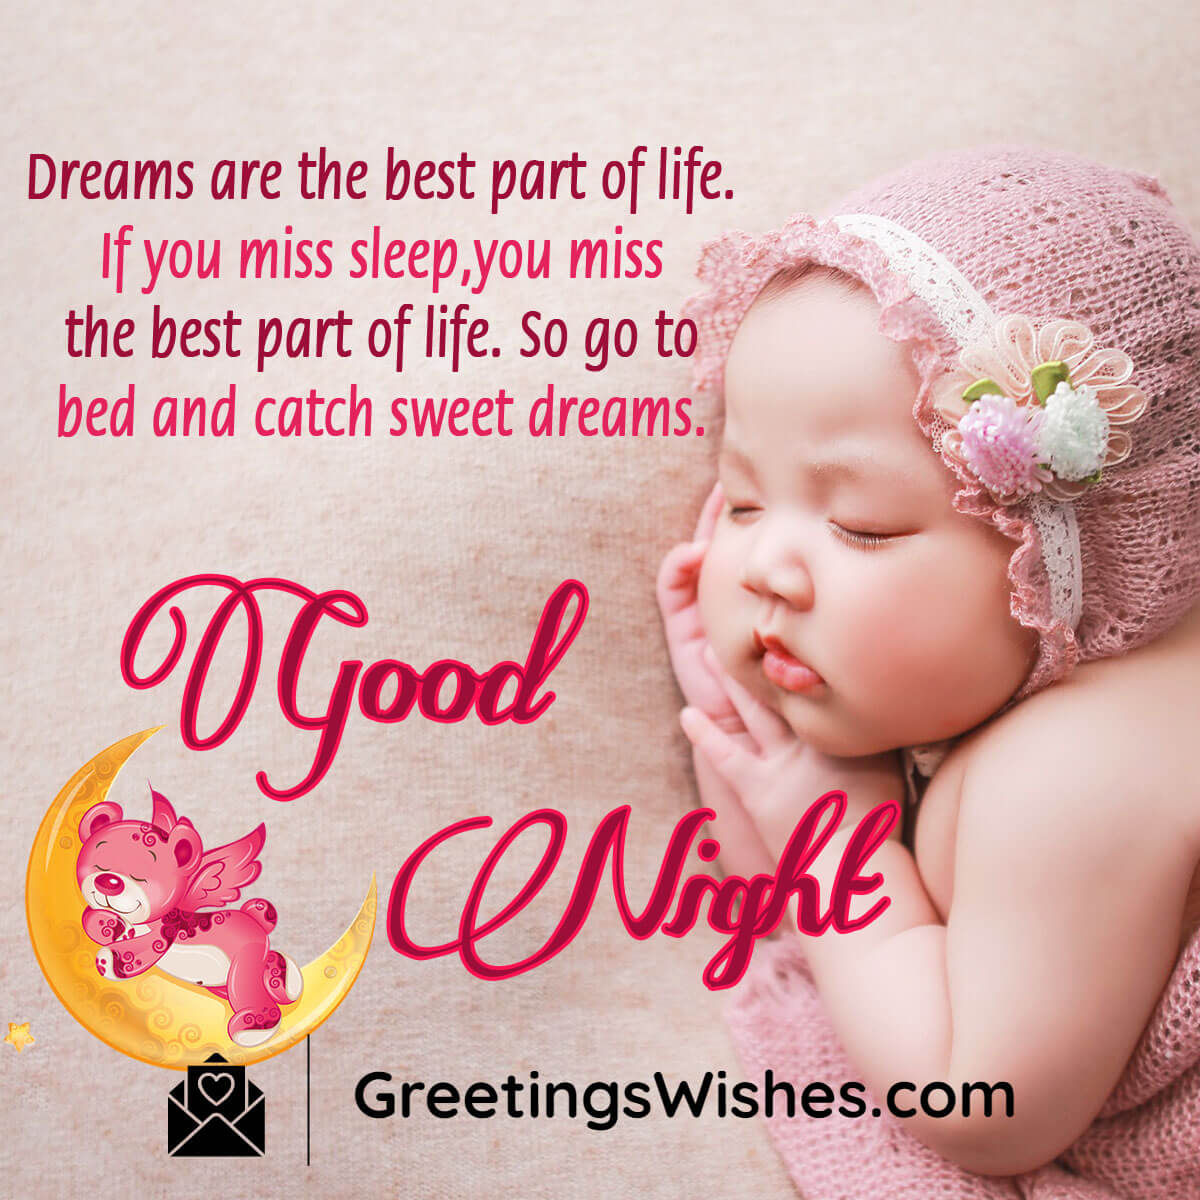 Good Night Wishes - Greetings Wishes